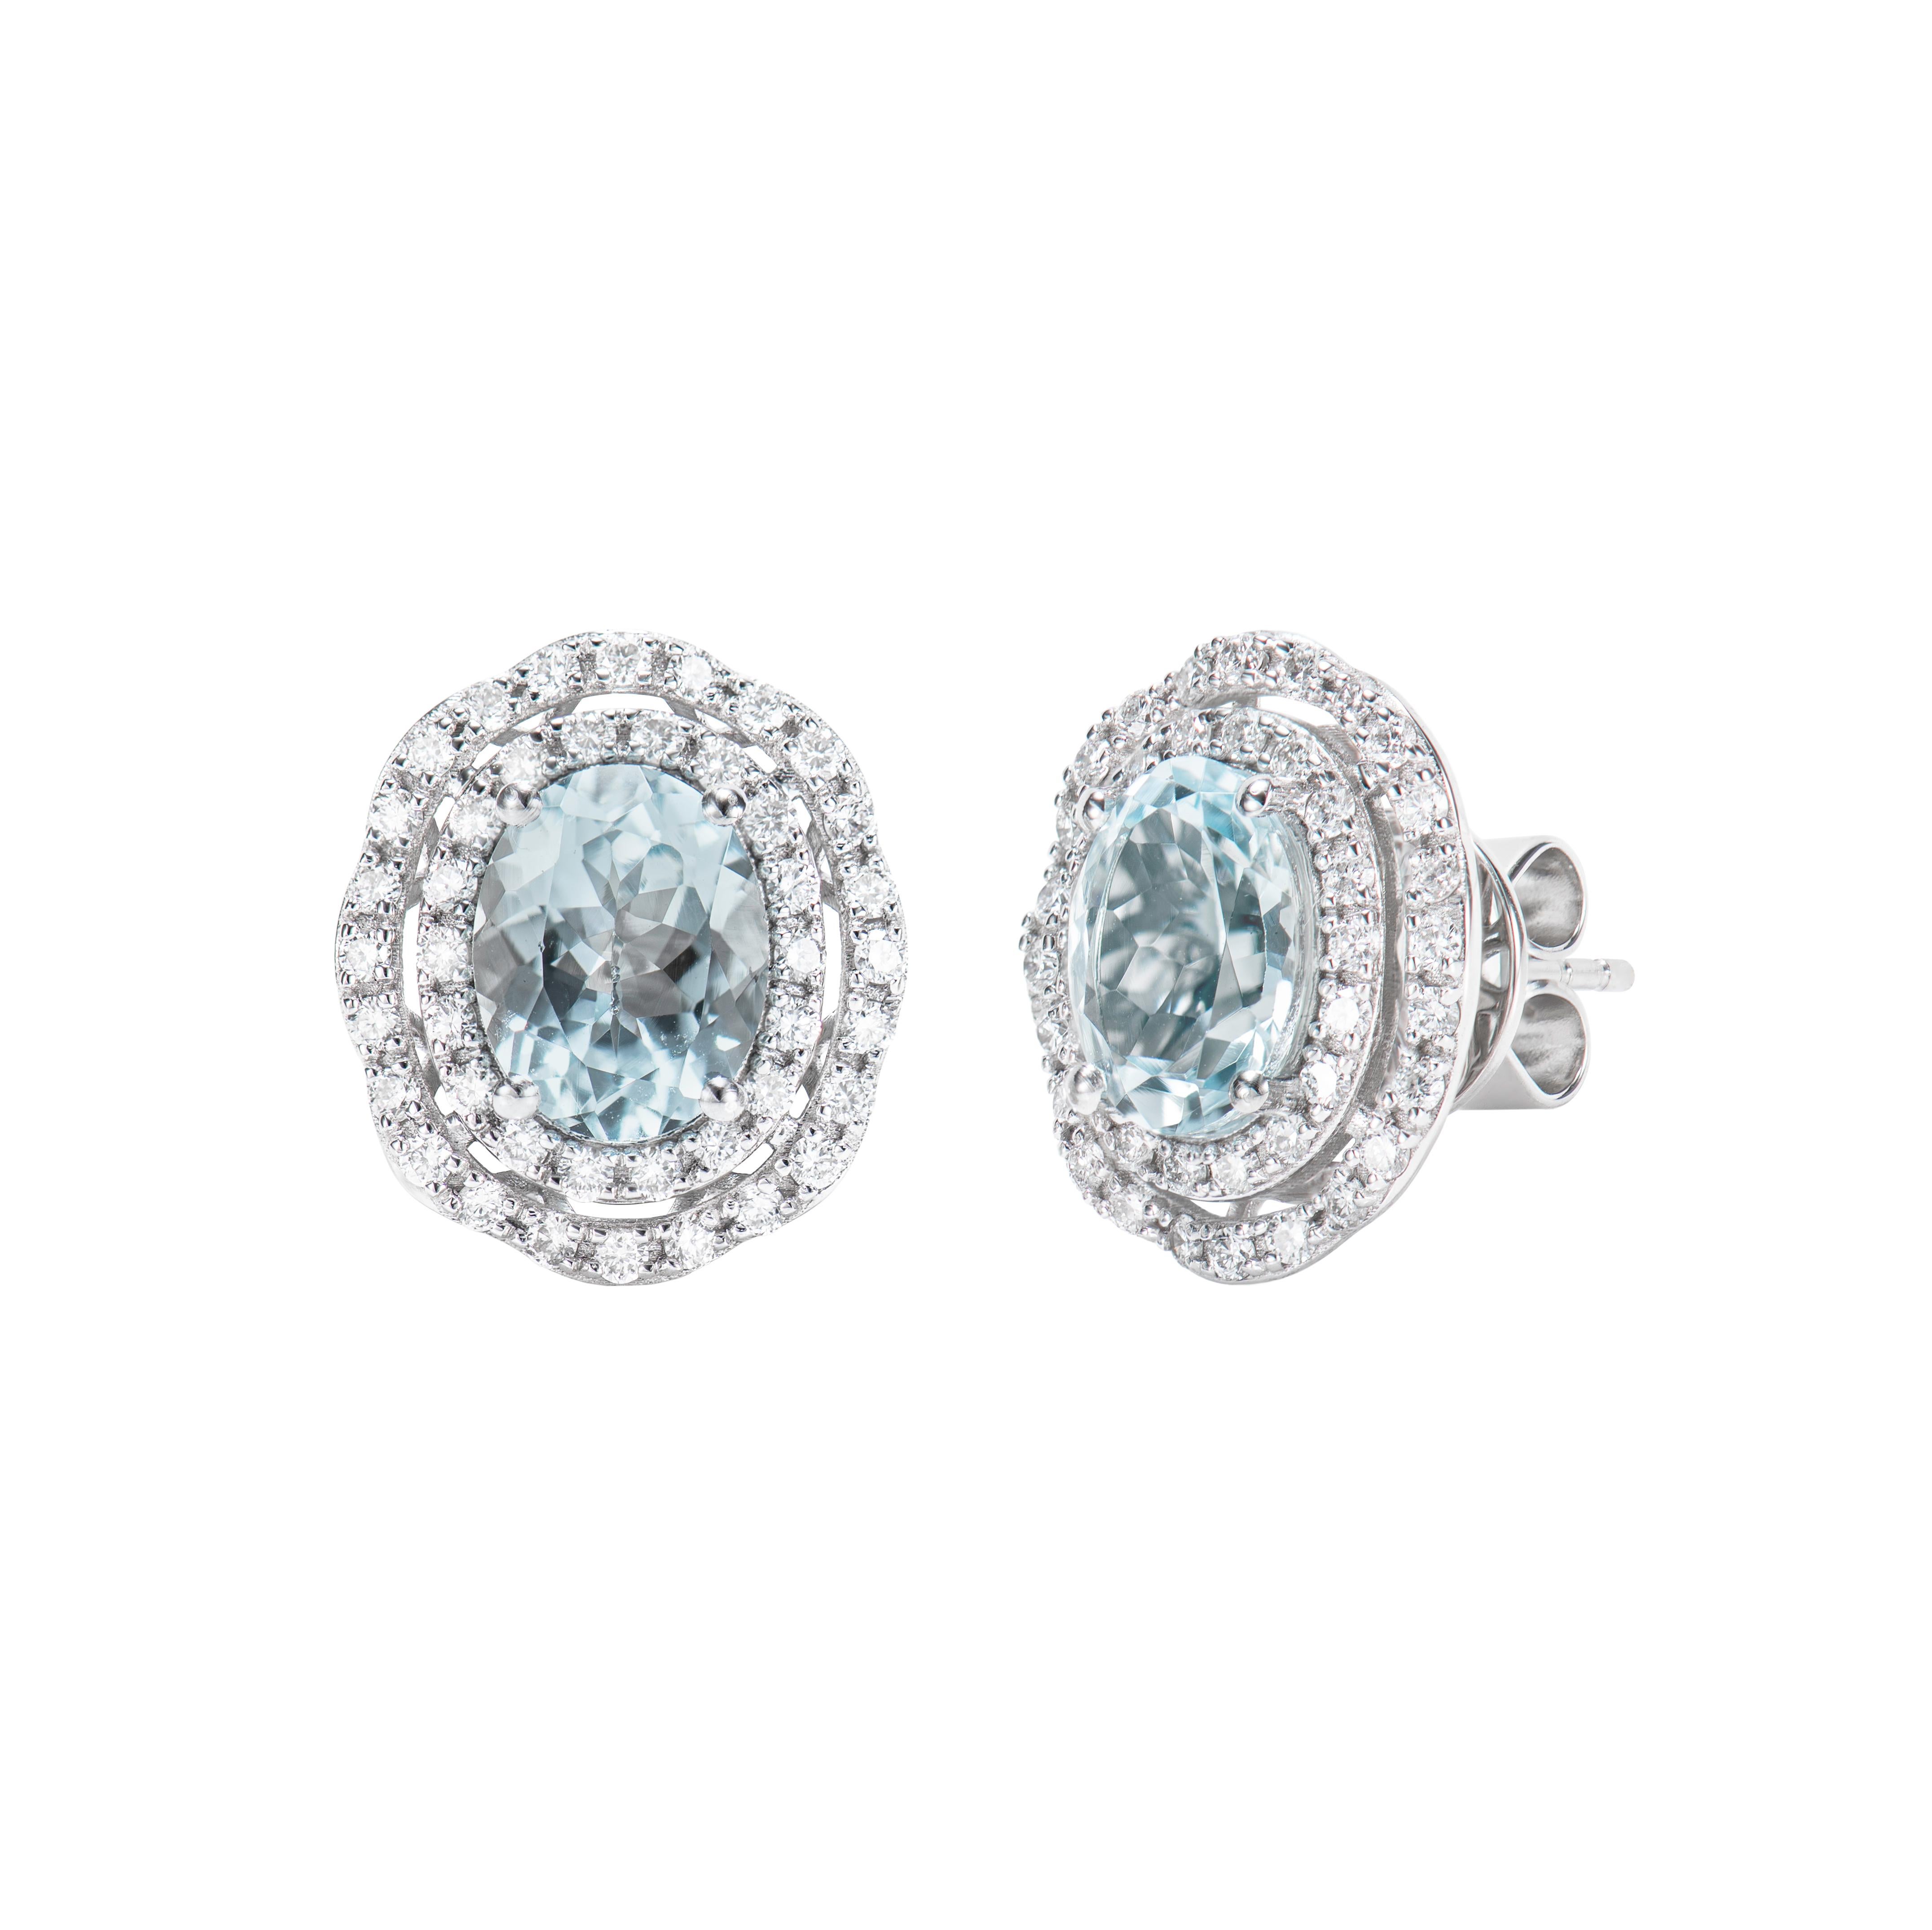 Oval Cut Aquamarine and White Diamond Studs Earring in 18 Karat White Gold. For Sale